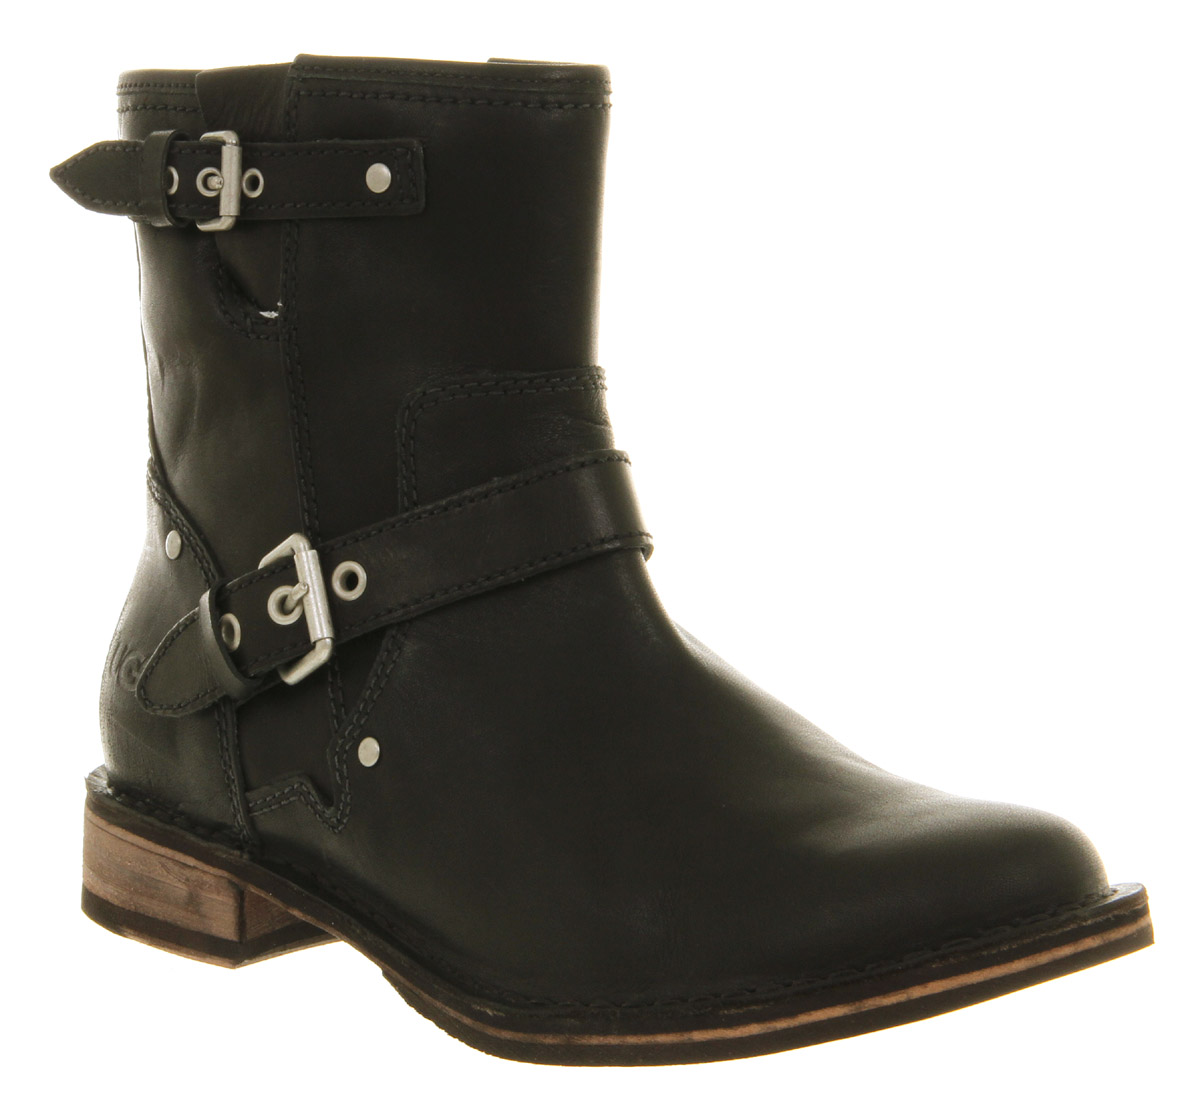 Lyst - Ugg Fabriza Motorcycle Boot Black Leather in Black